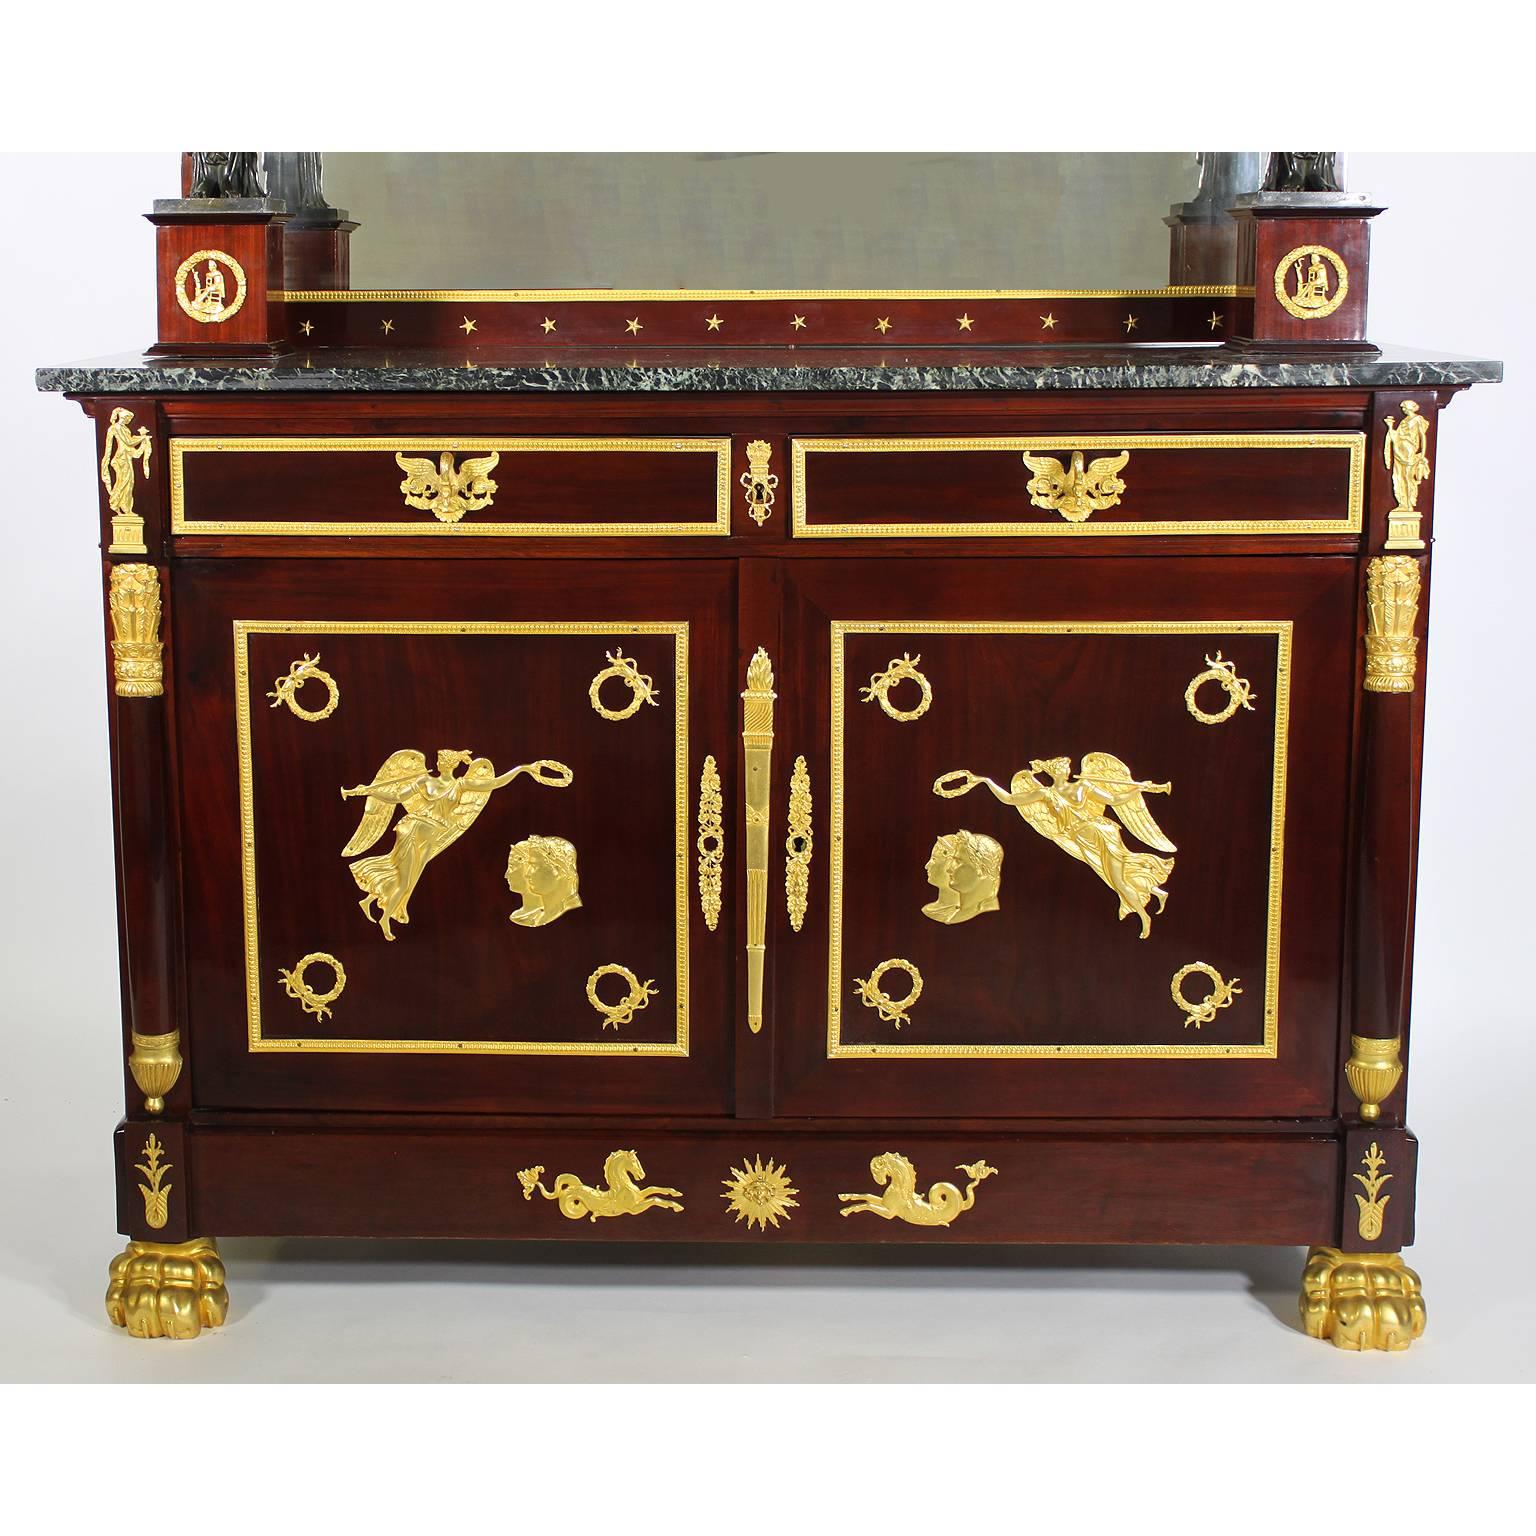 French Napoleon III Empire Revival Mahogany & Gilt Bronze-Mounted Server Buffets, Pair For Sale